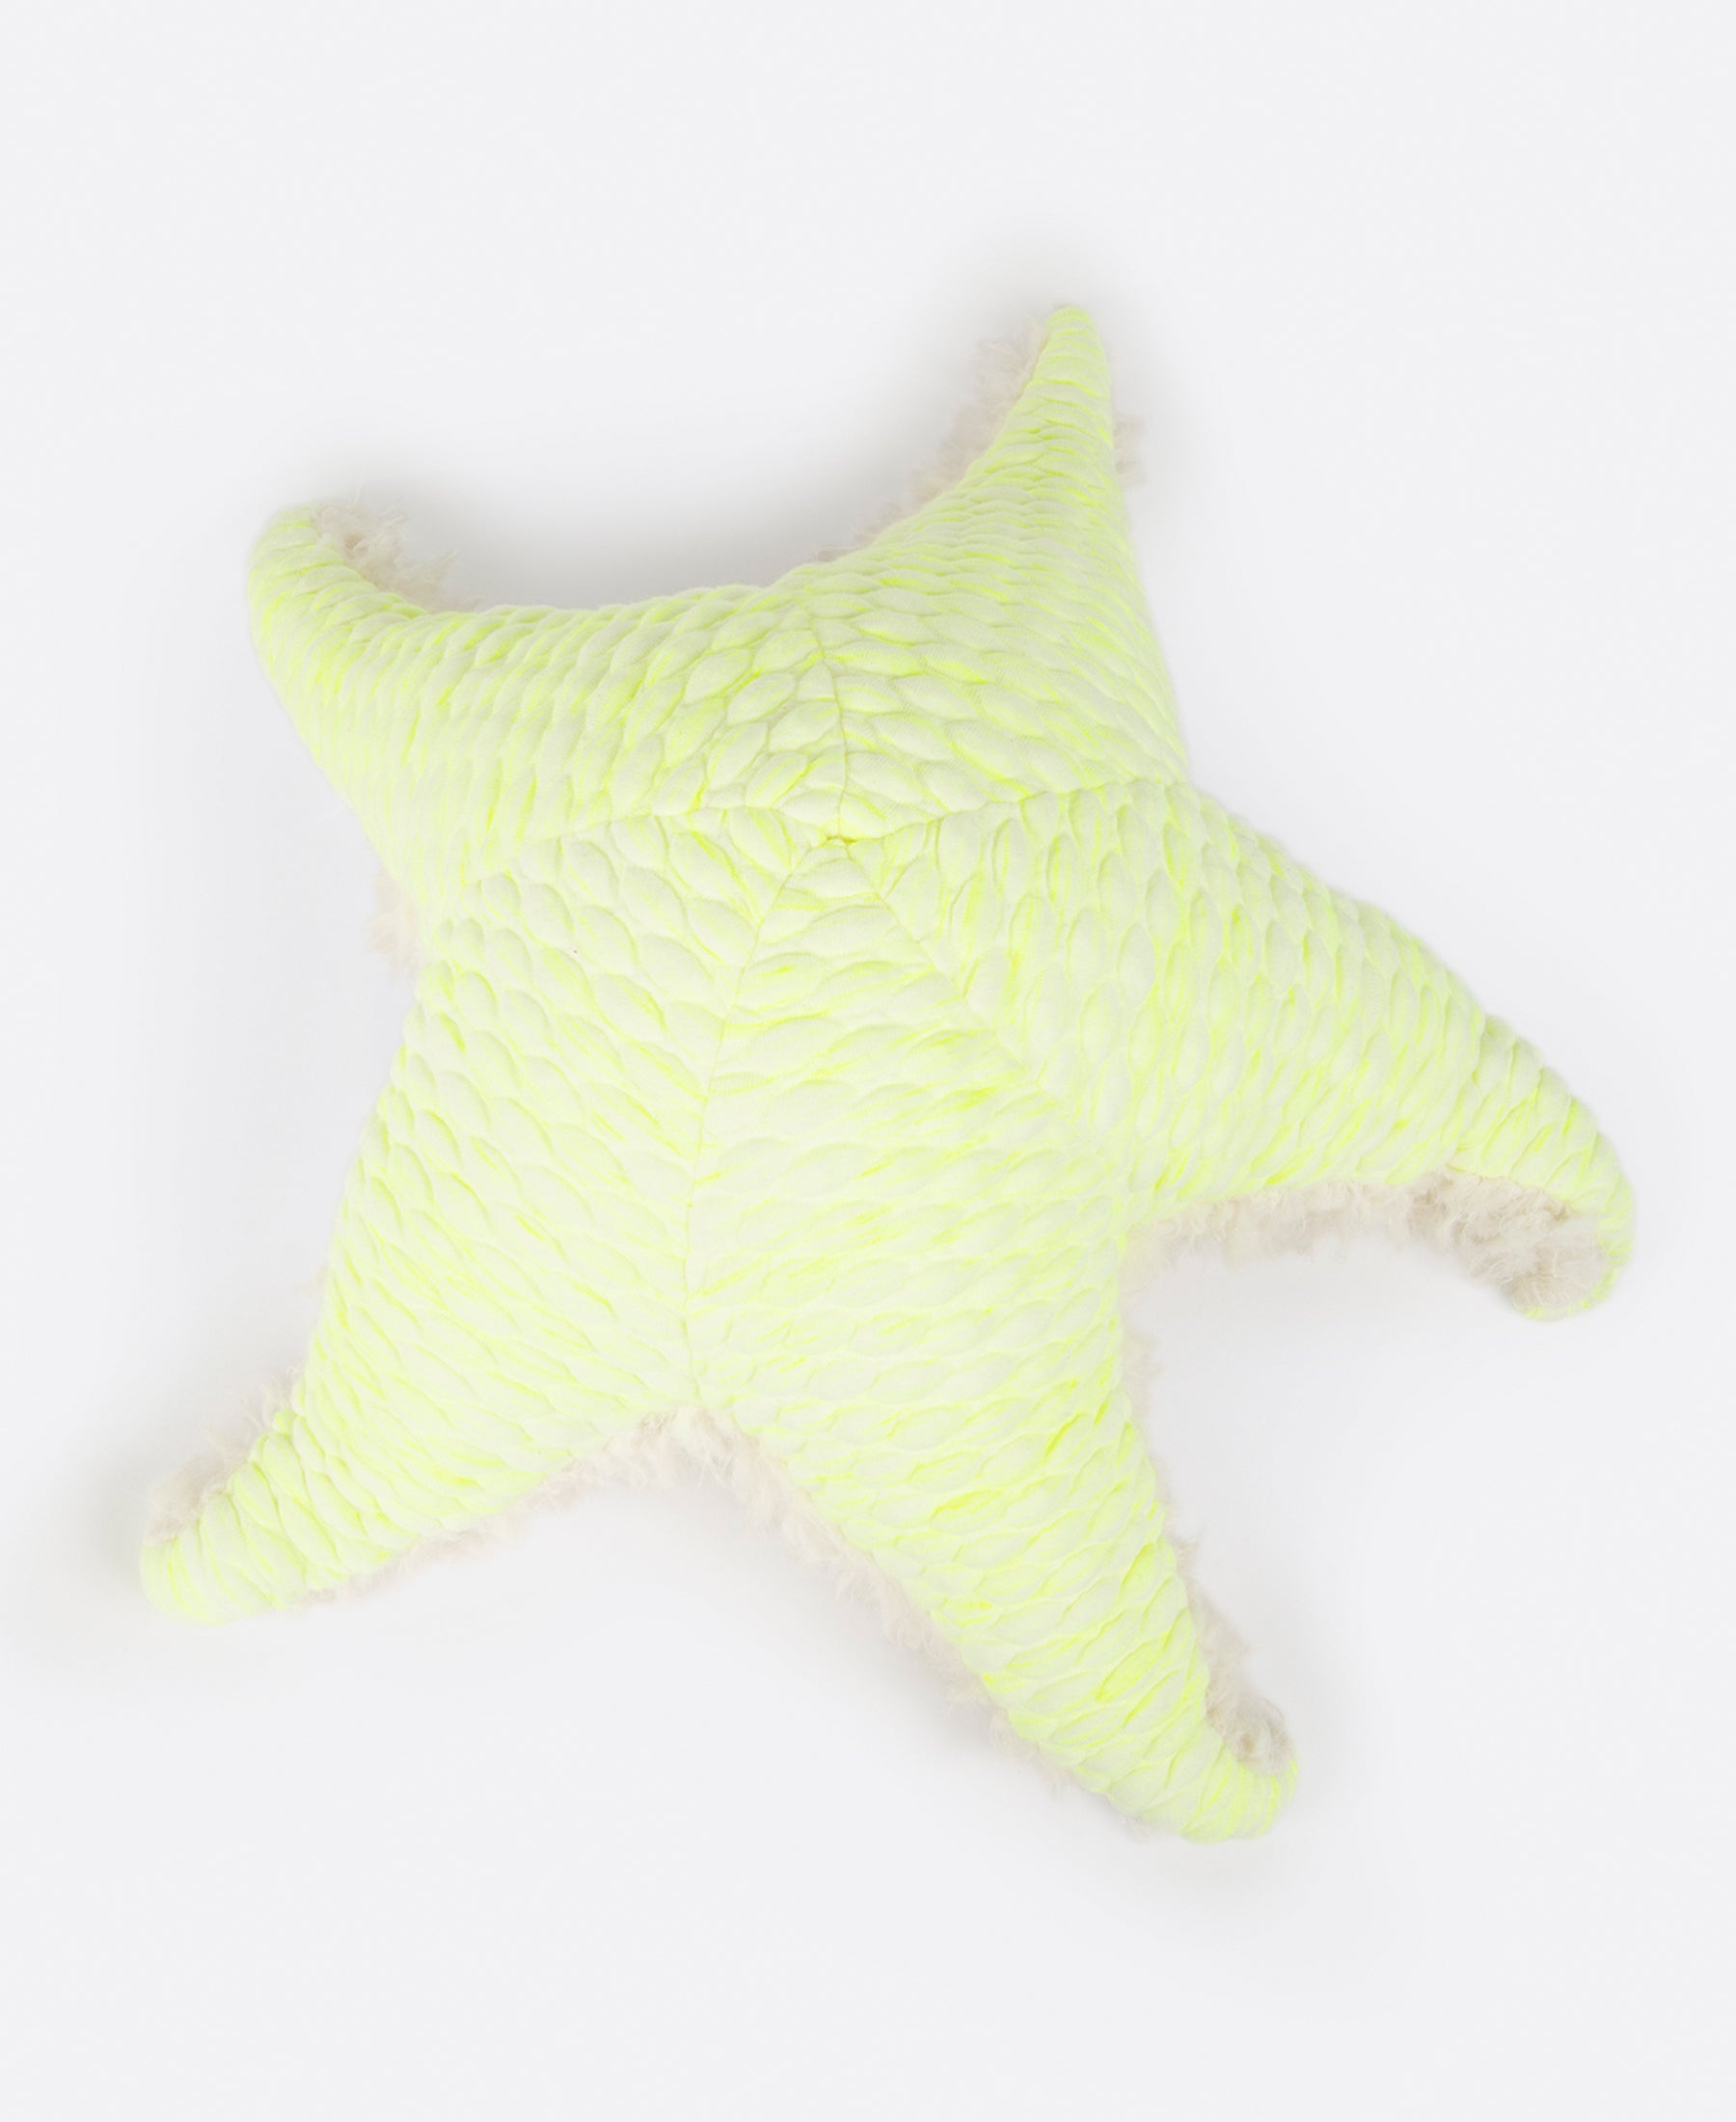 A neon yellow starfish stuffed animal, shown from above.